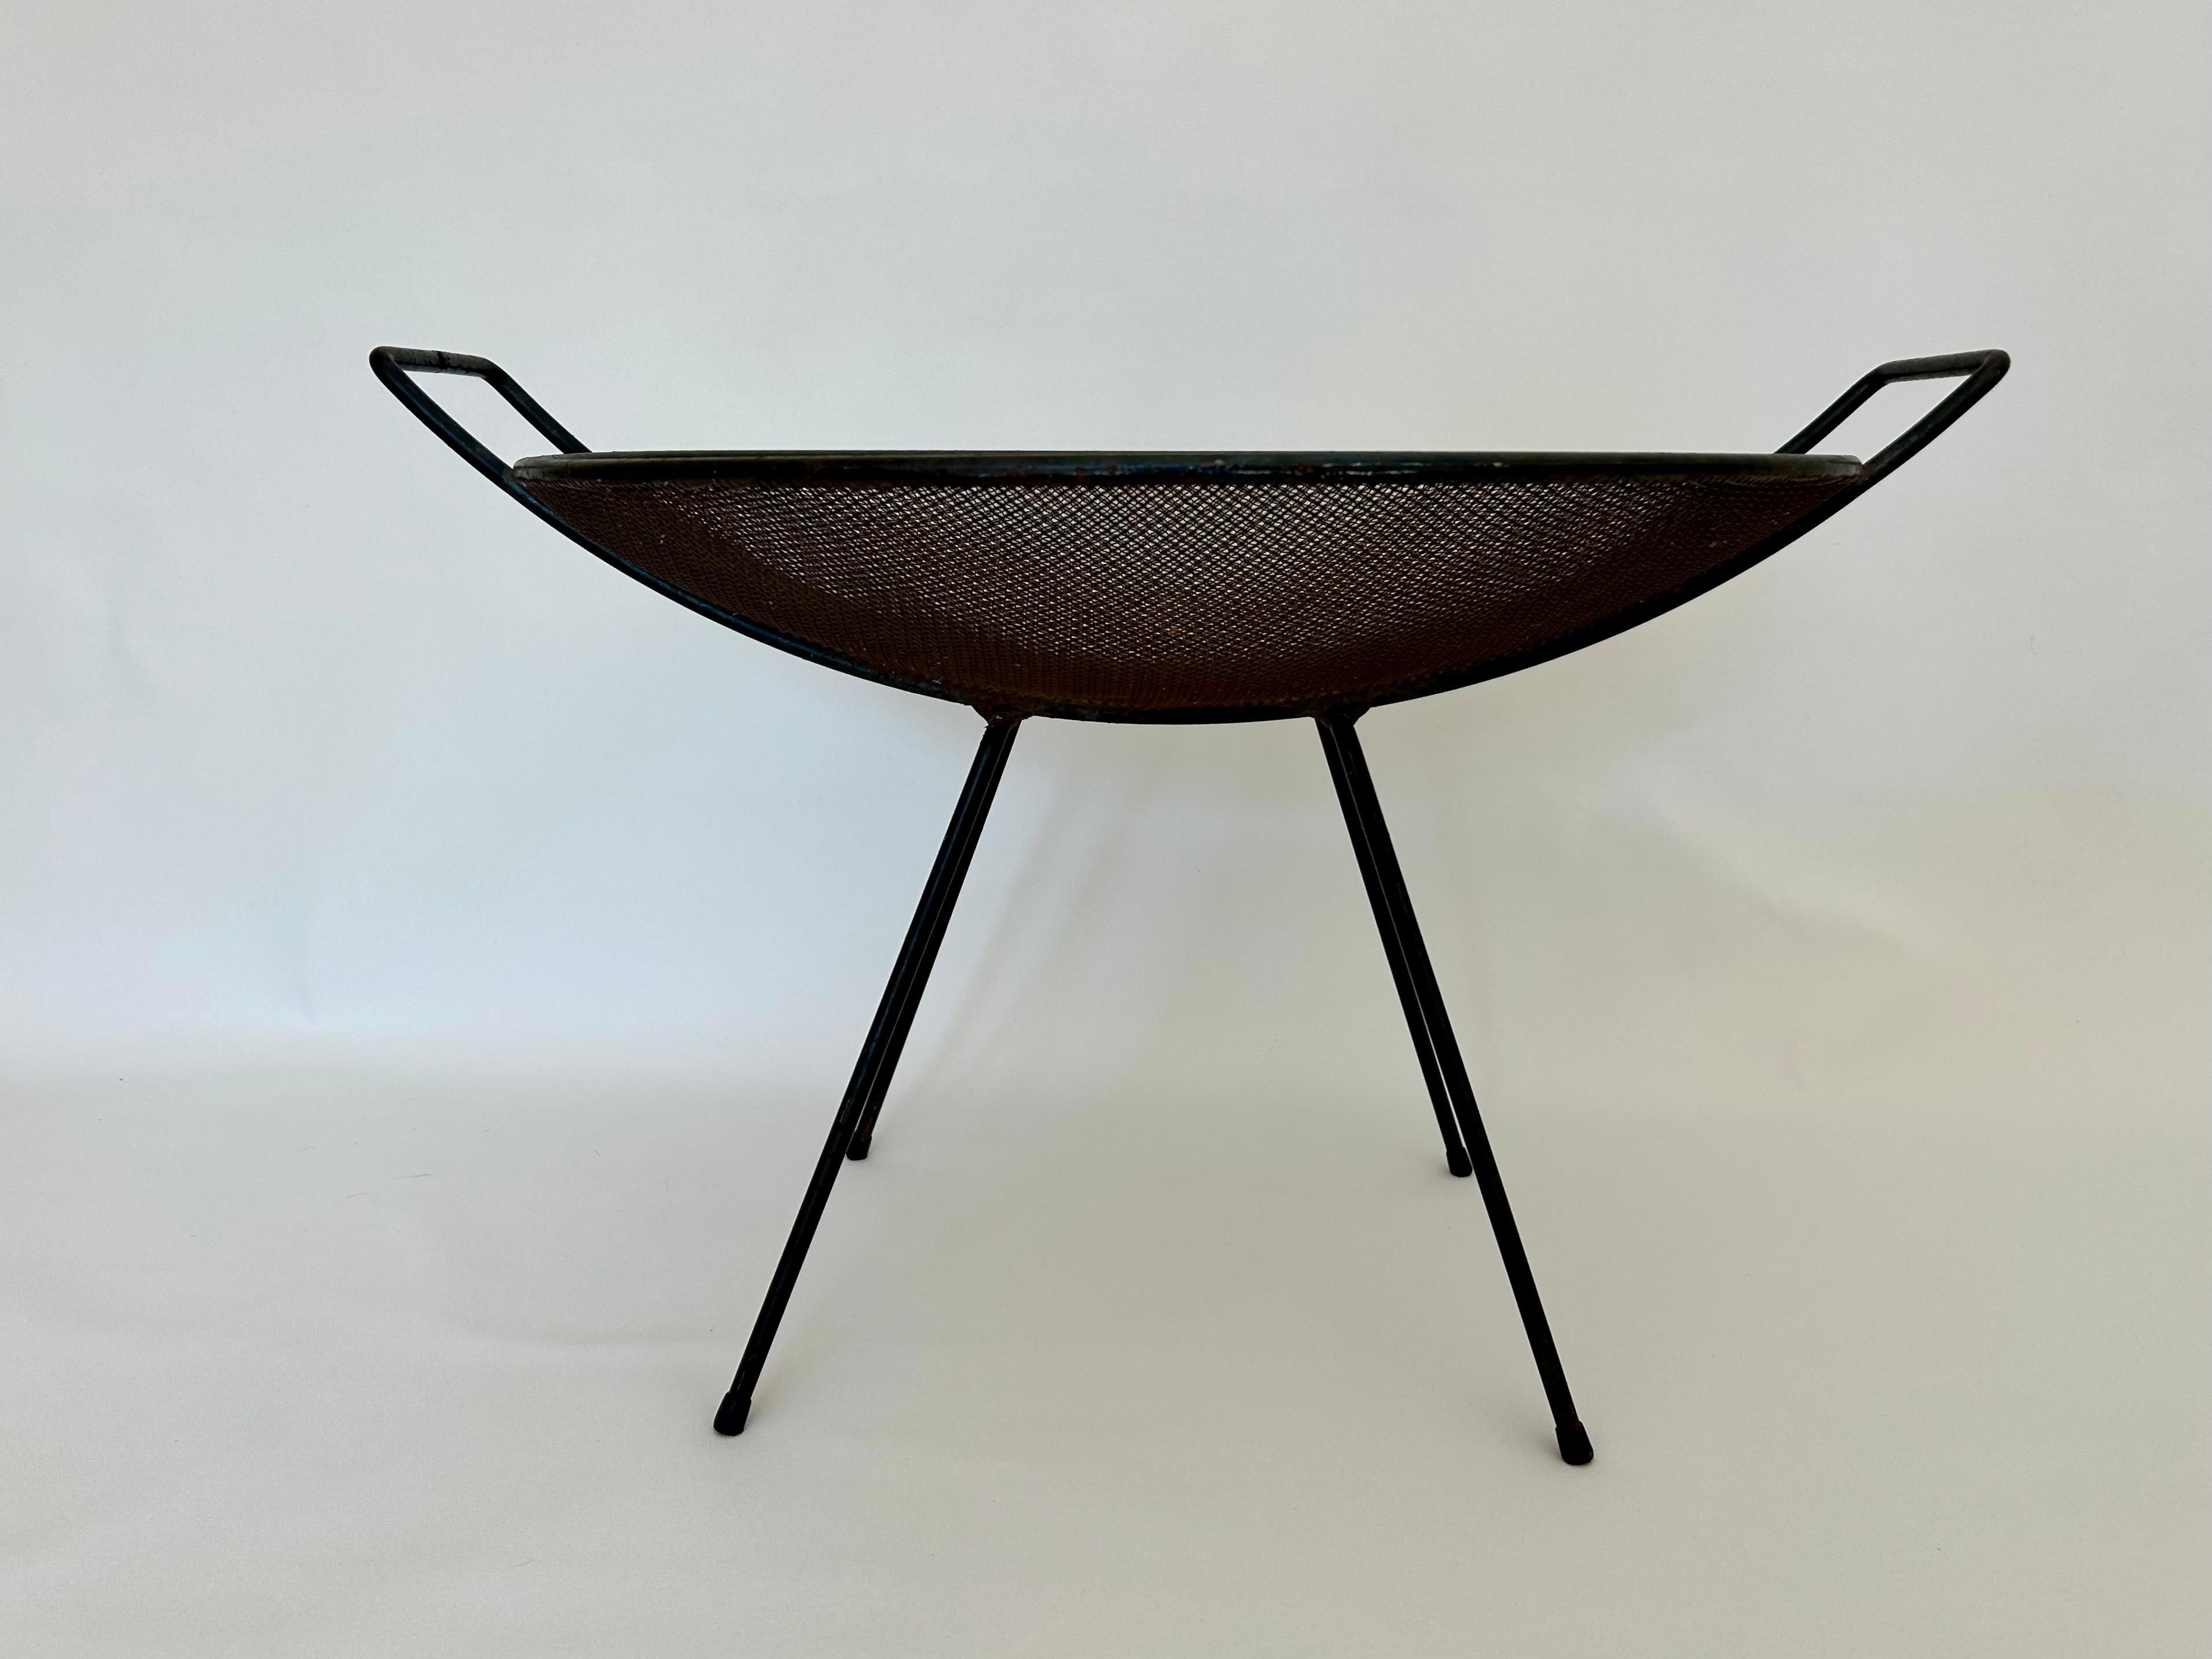 Modernist design.
Form + function.
Enameled steel with wire mesh basket and plastic boots.
Original vintage condition, minor wear with patina.
No damage or repairs.
Solid and sturdy.
Presents well for interiors and collections. 
Great for holding